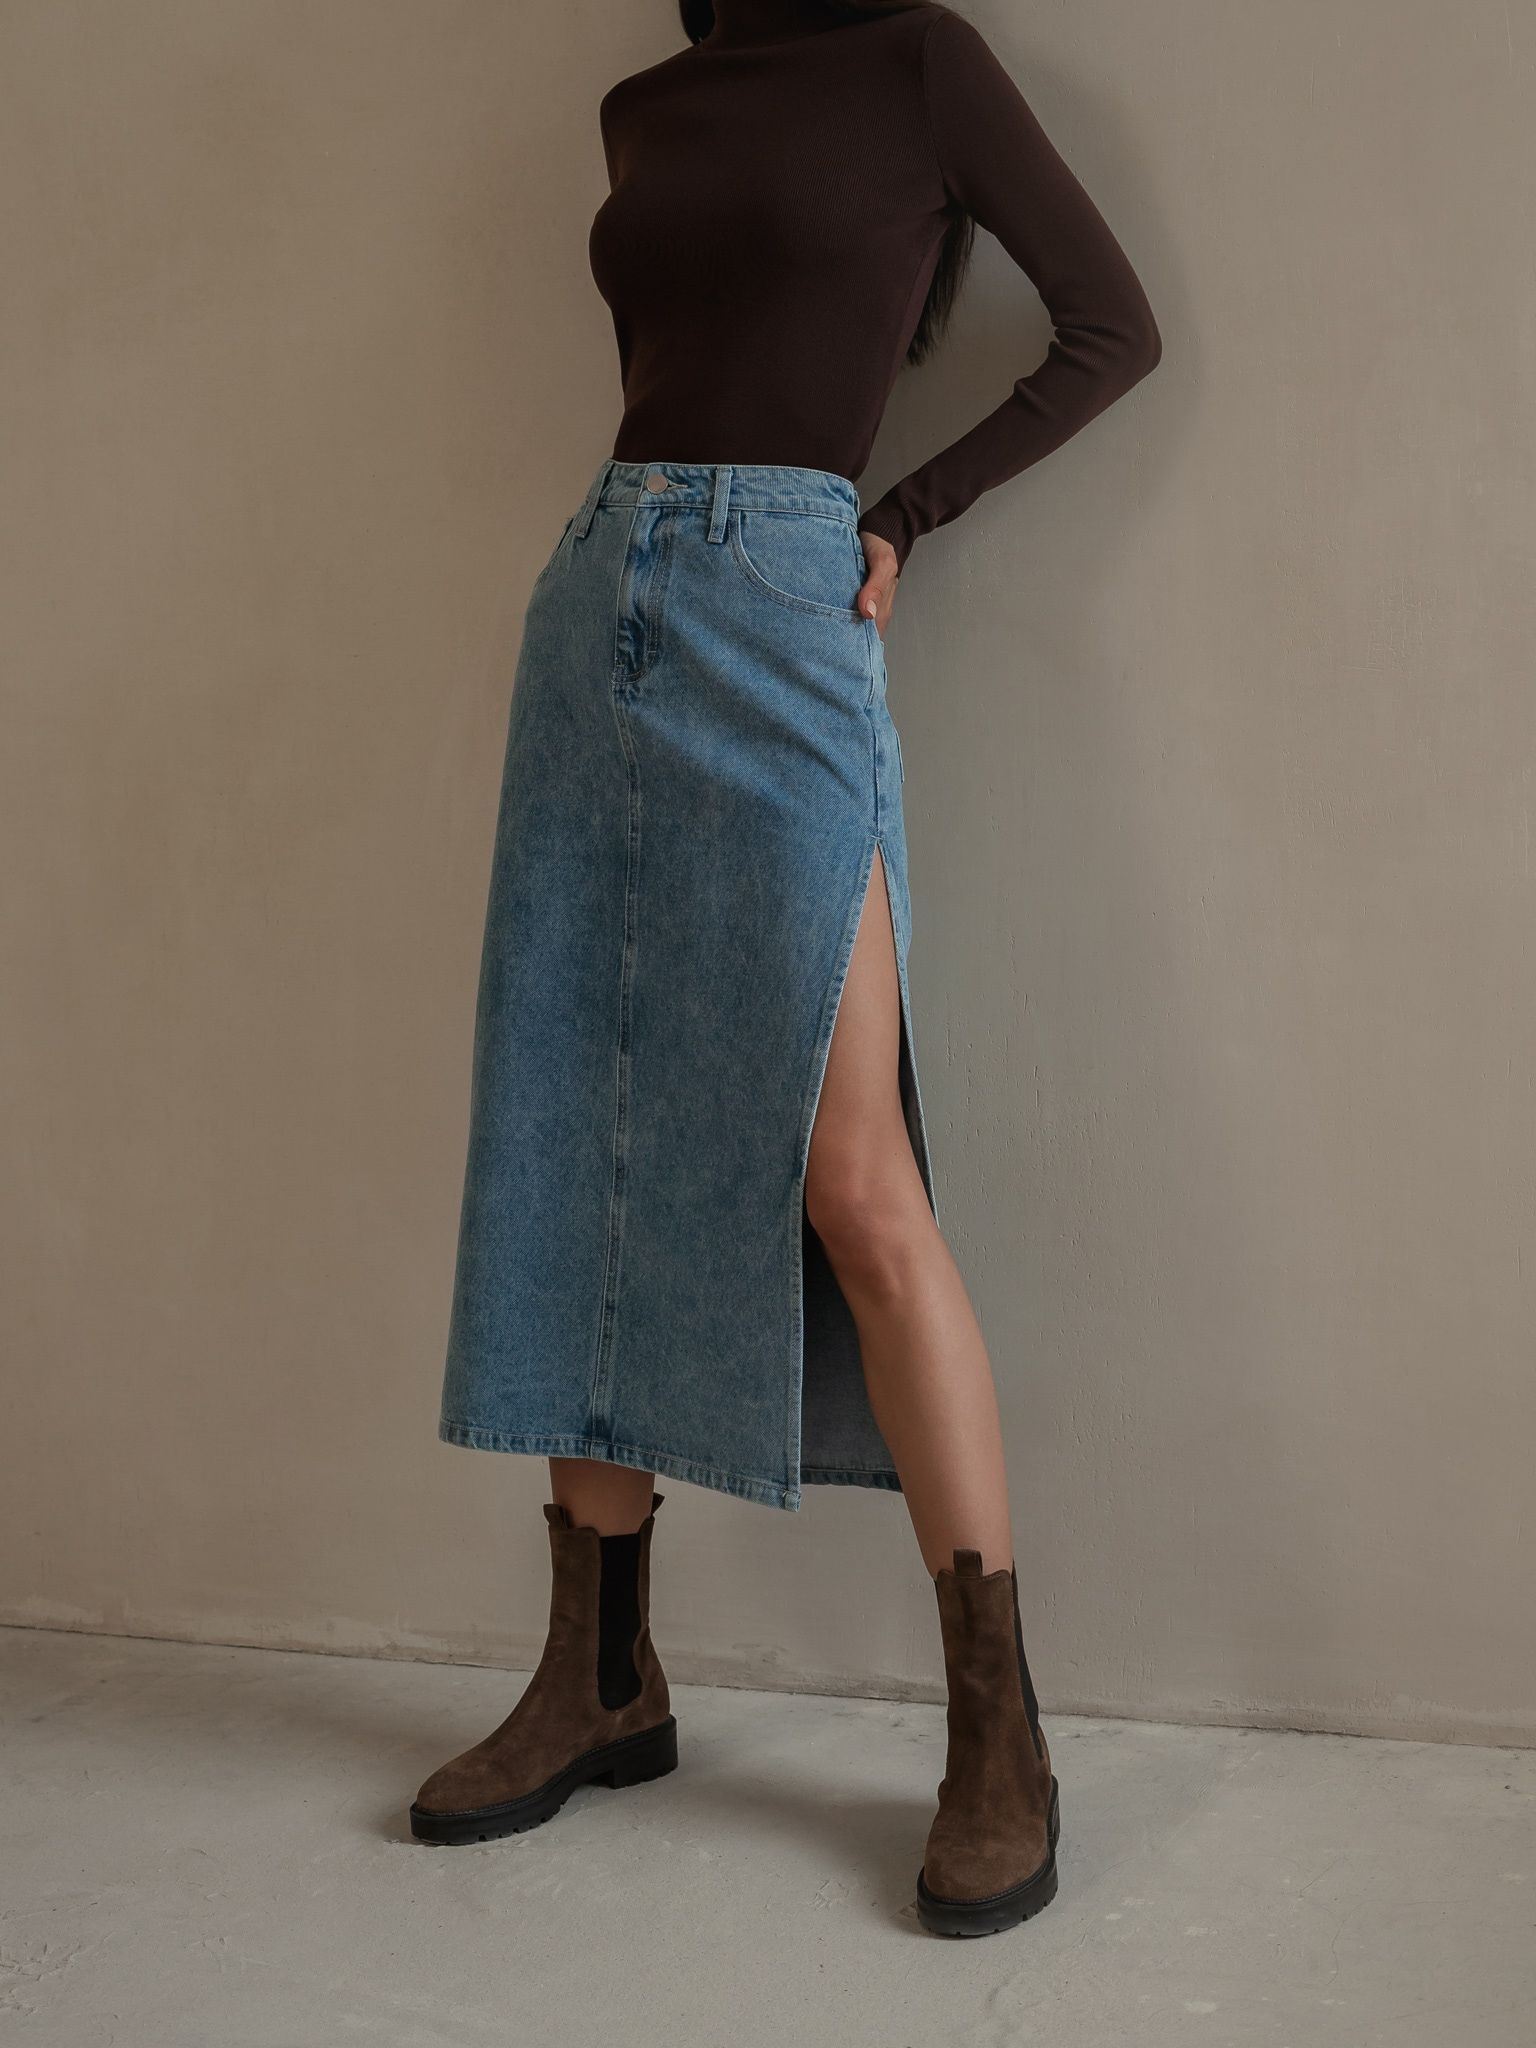 Add denim midi skirts to your fashions to look more elegant